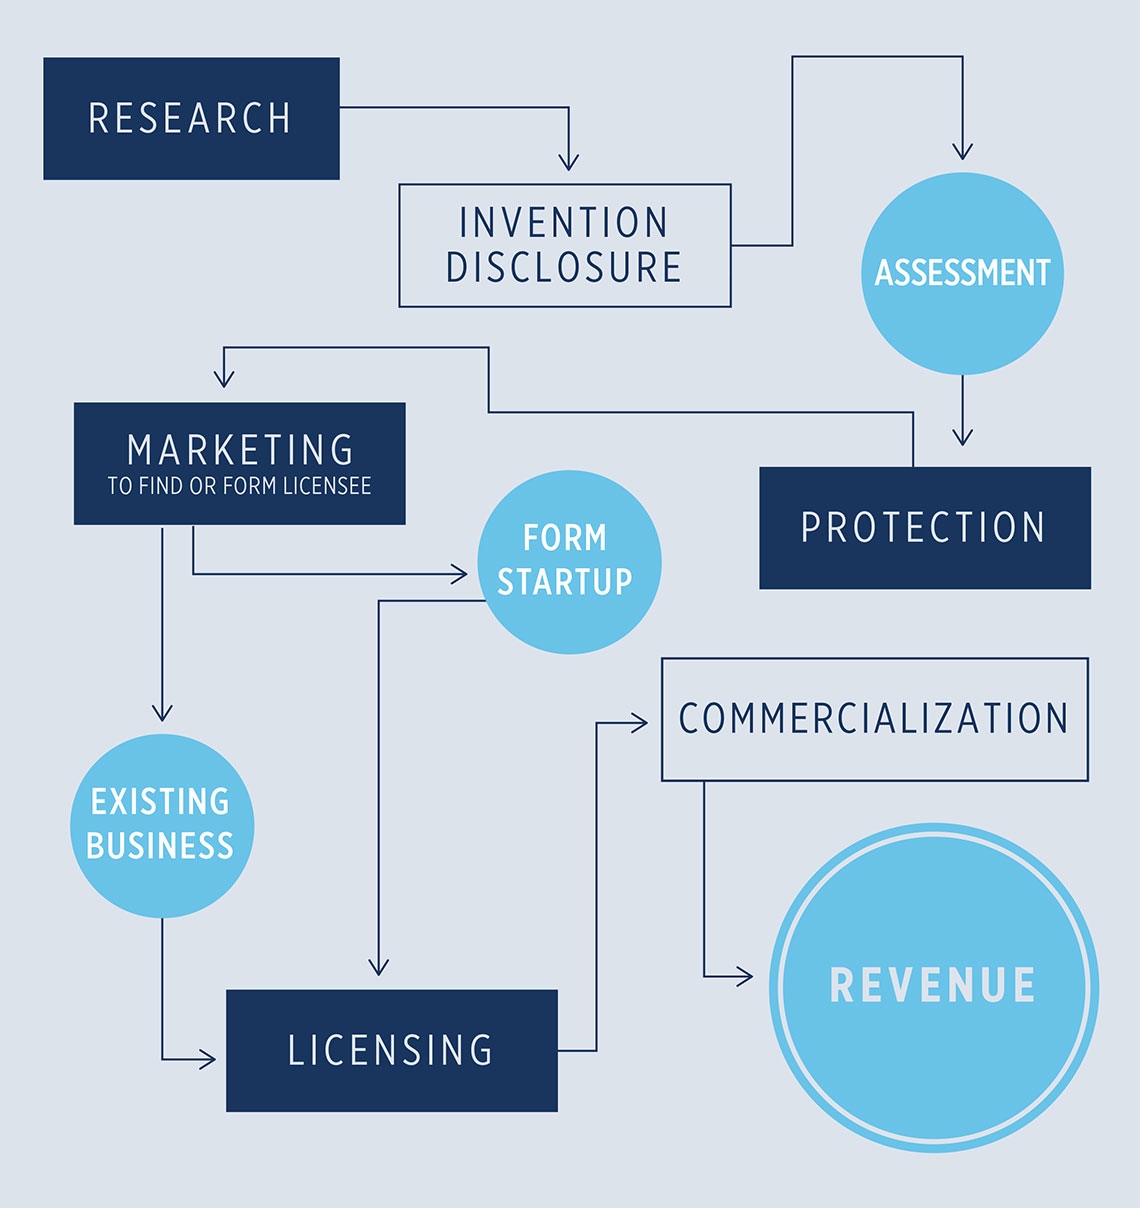 Infographic/flowchart showing the commercialization process, from research to invention disclosure to licensing to commercialization to revenue realization and other steps along the way.